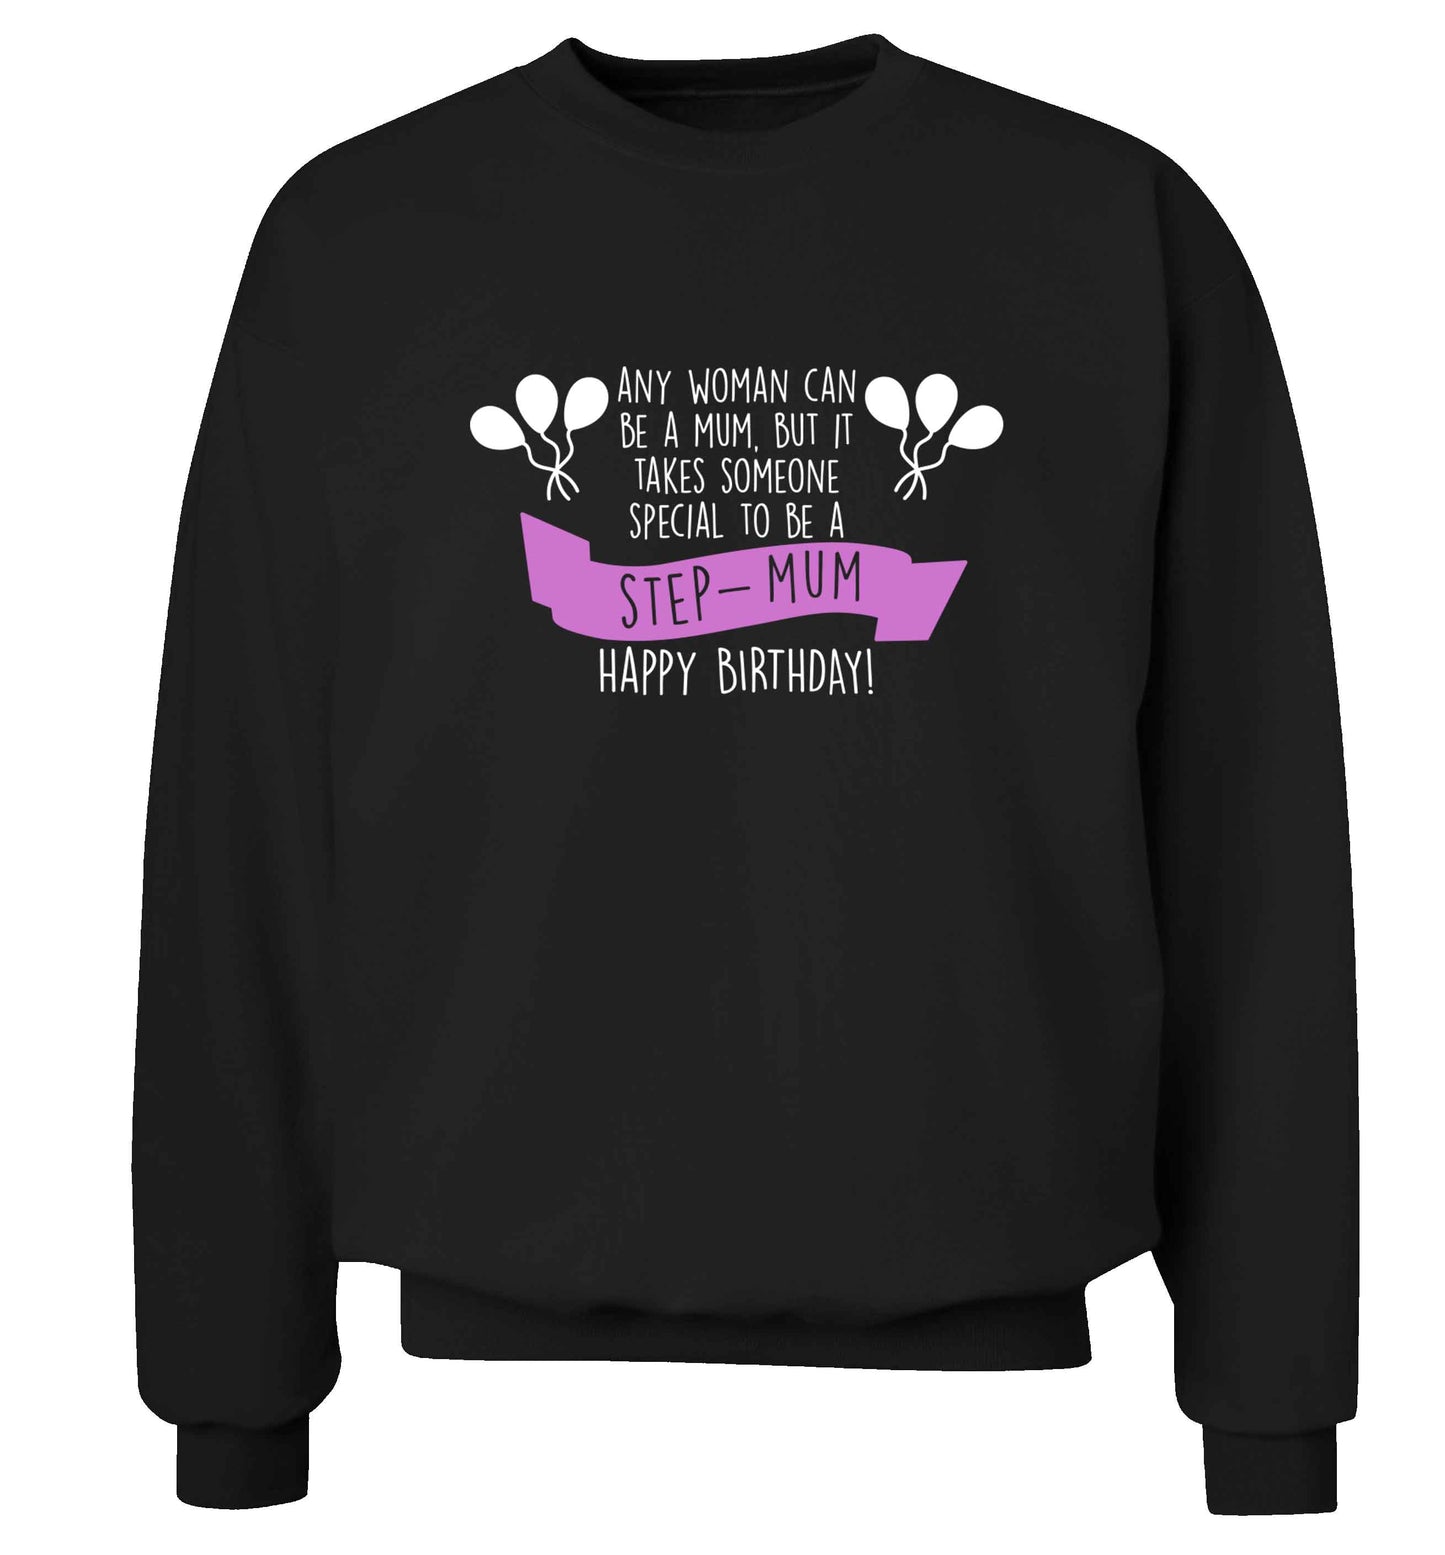 Takes someone special to be a step-mum, happy birthday! adult's unisex black sweater 2XL